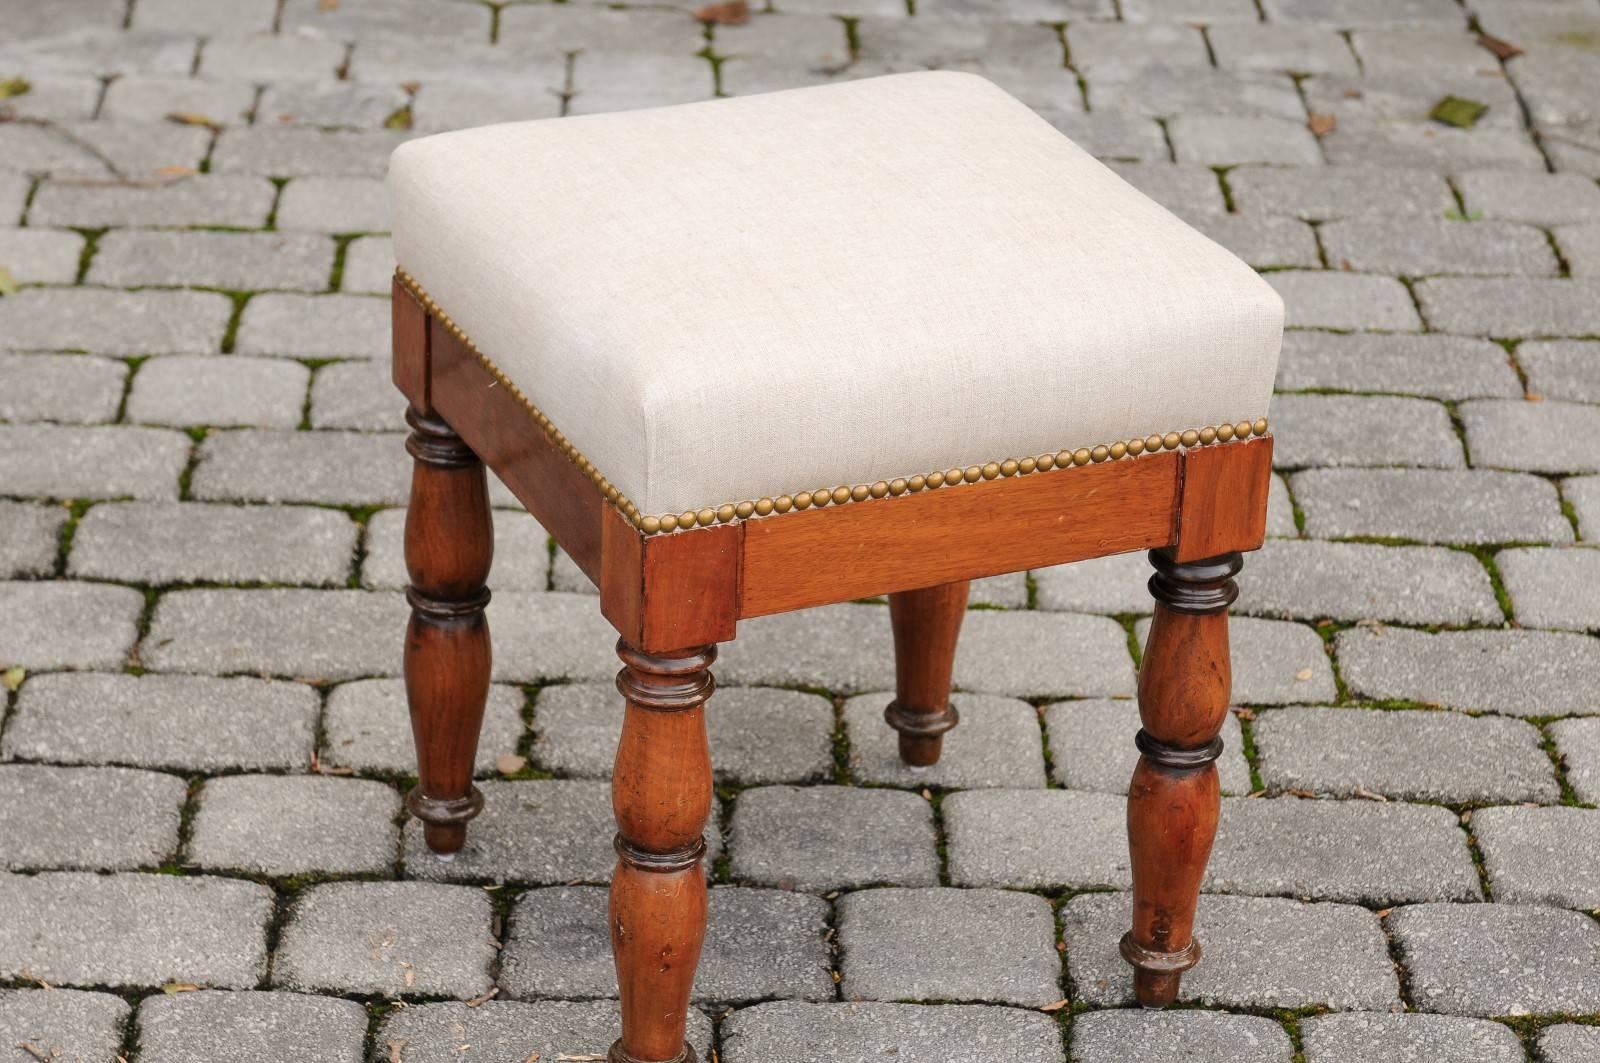 English 1870s Walnut Stool with Upholstered Seat, Nailheads and Turned Legs For Sale 2